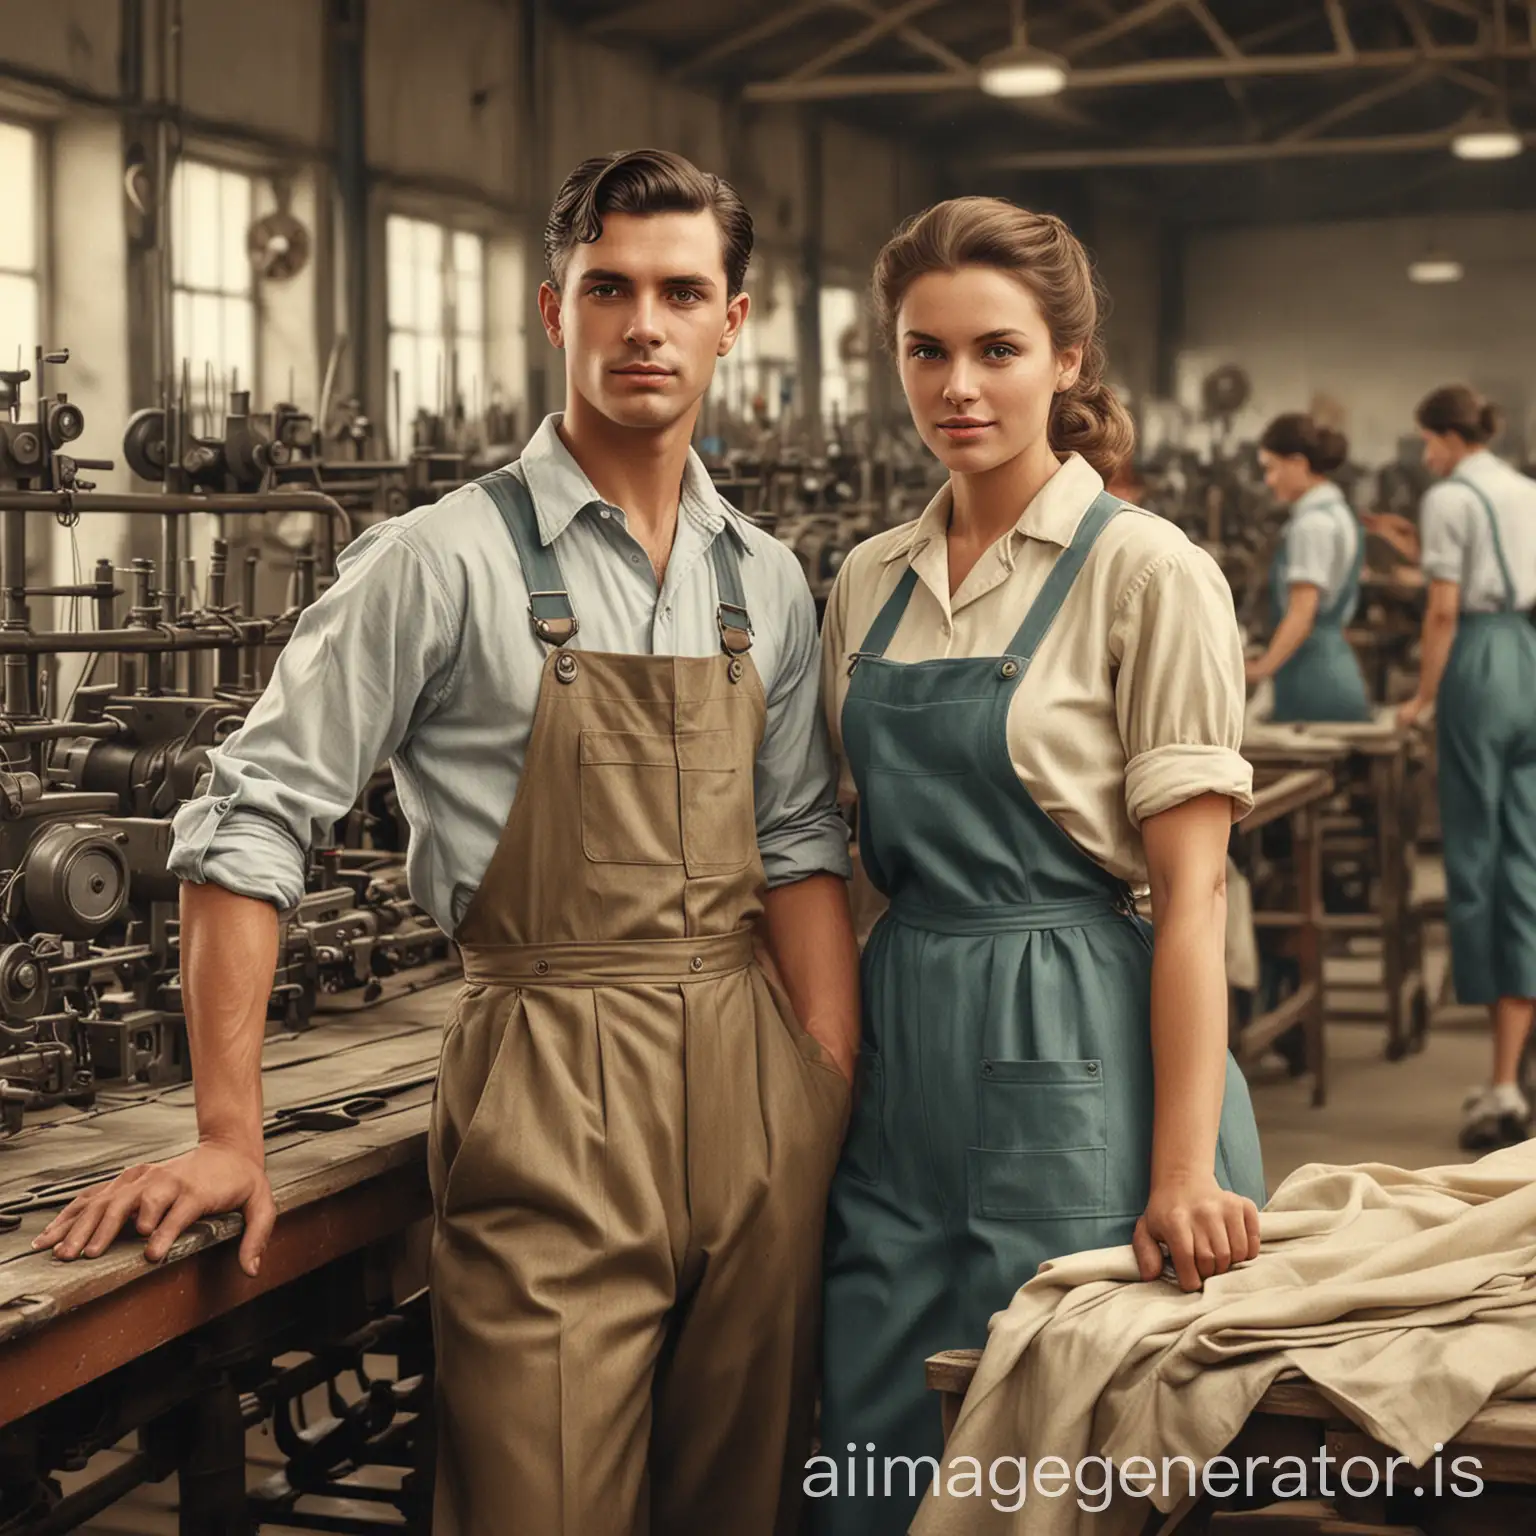 Vintage-Male-and-Female-Textile-Workers-Posing-in-a-Factory-Setting